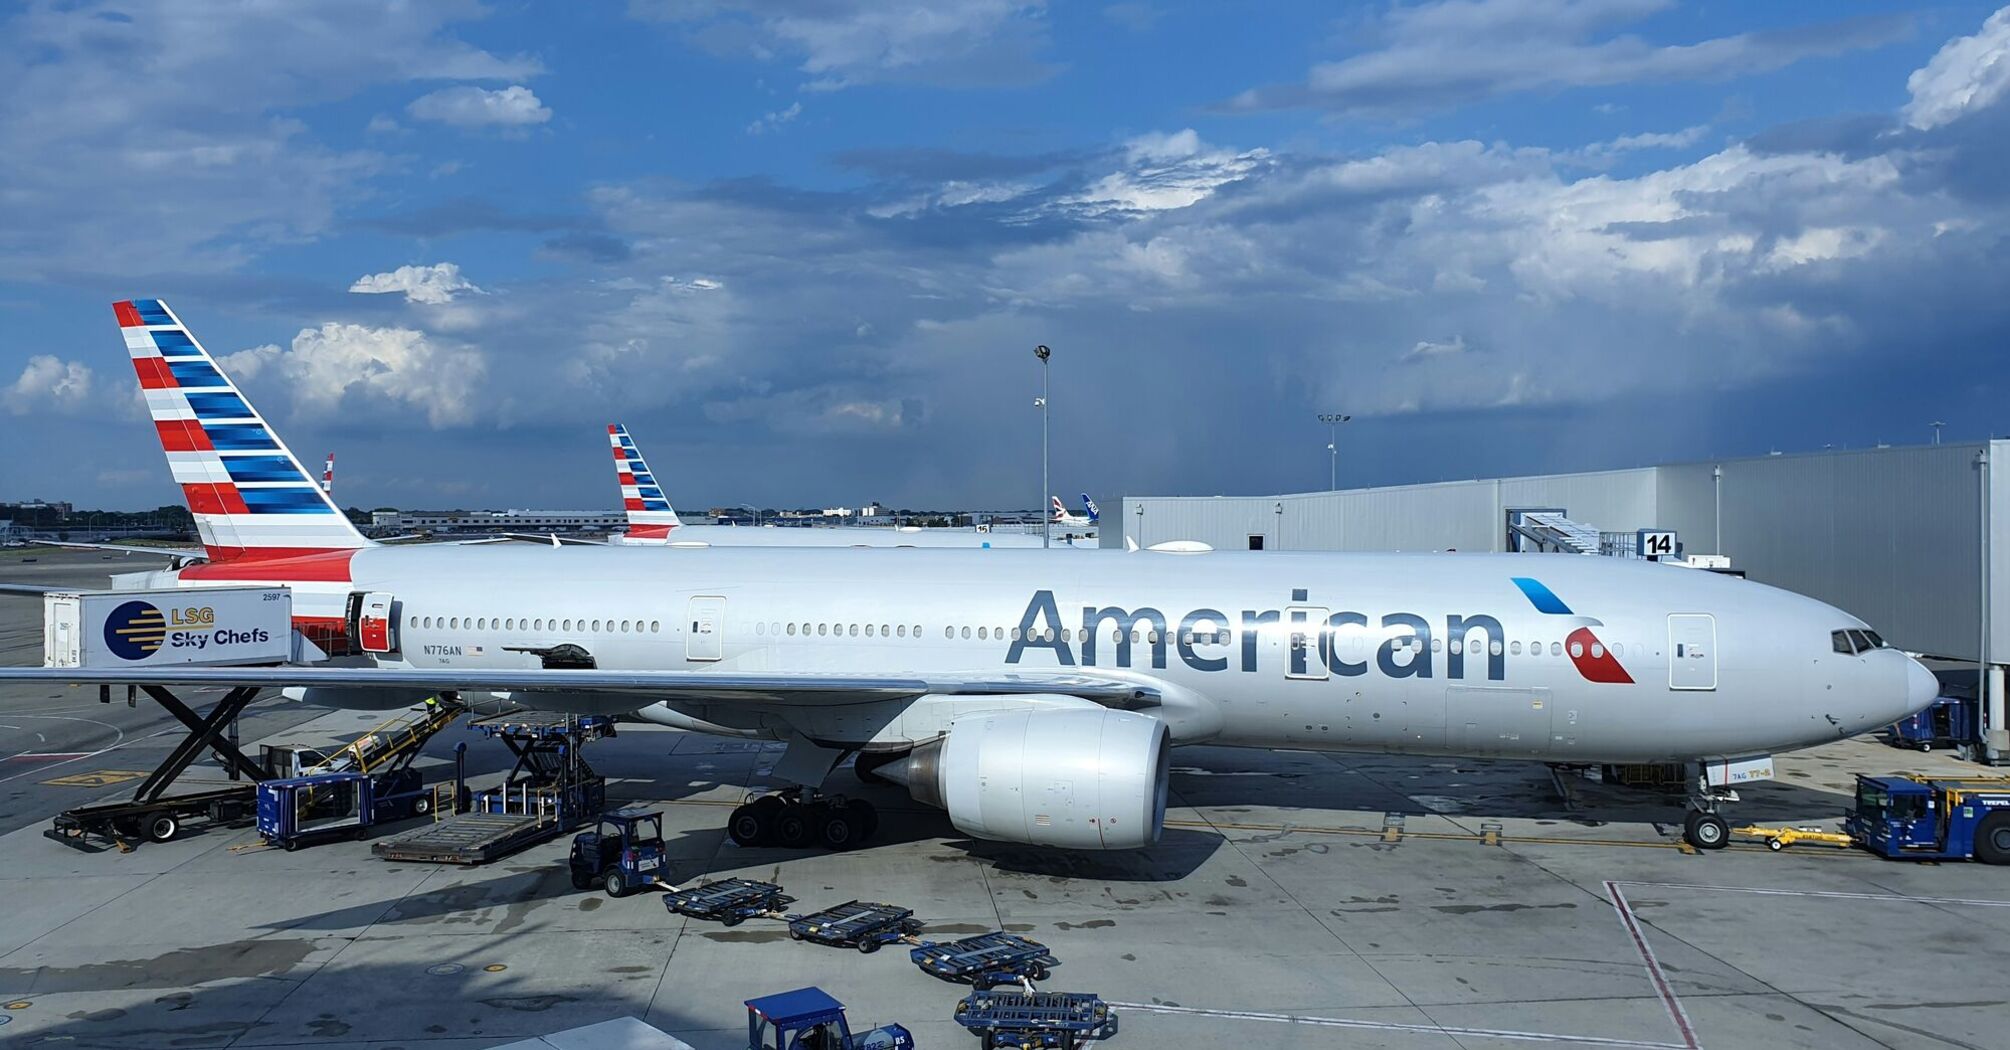 American Airlines aircraft at the airport gate during daytime with service vehicles around and clouds in the sky